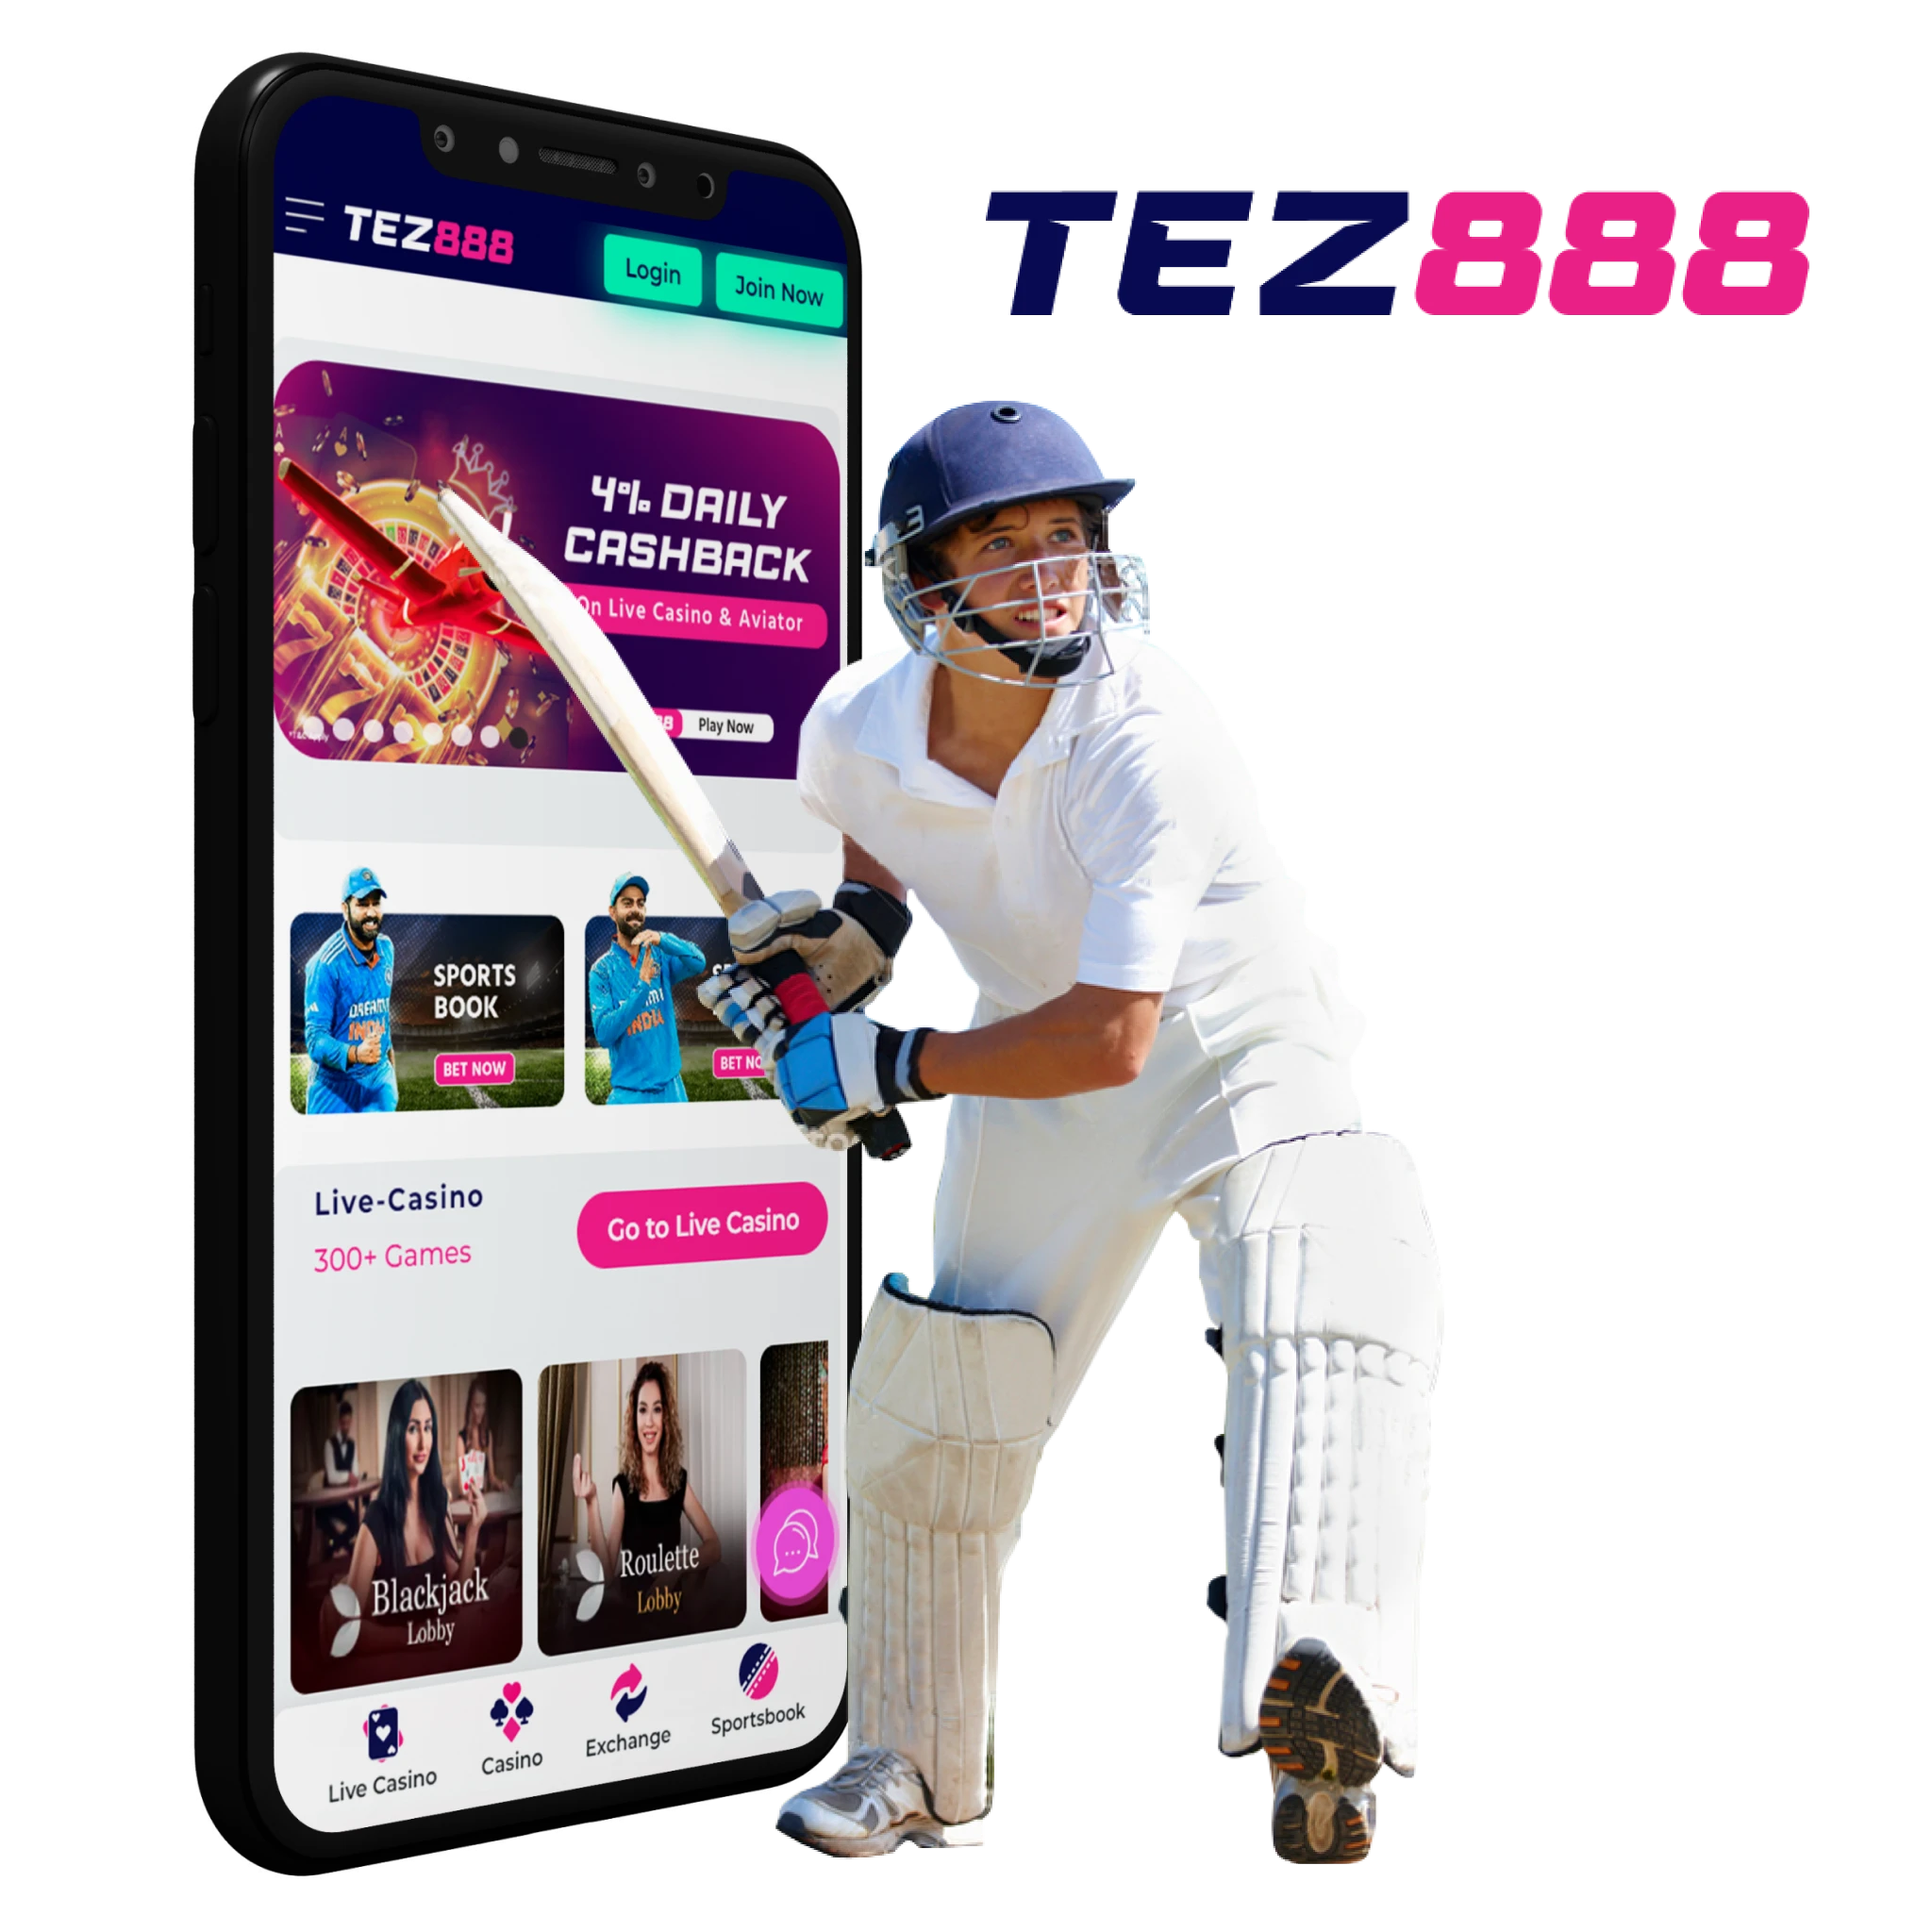 Tez888 app offers substantial advantages to betting admirers, such as generous bonuses and extensive cricket coverage.